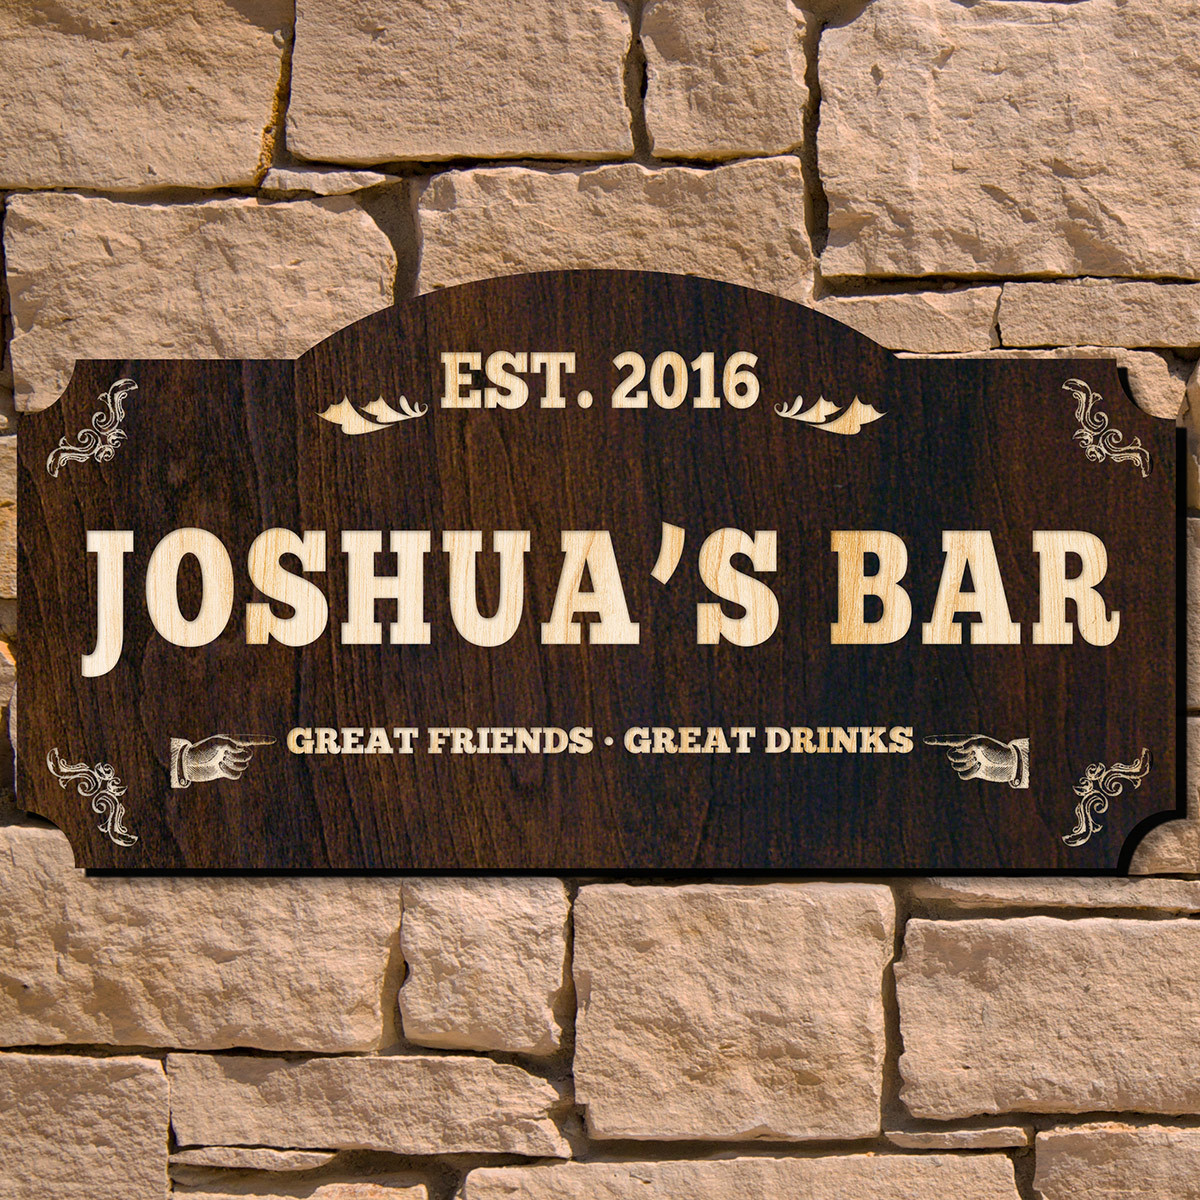 Sometimes you long for those days of sitting in your favorite bar, with beer in our bellies and not a care in the world. Bring those days back to life in your own home with our Classic Bar personalized wood sign. This custom made wooden bar decor comes pe #bar